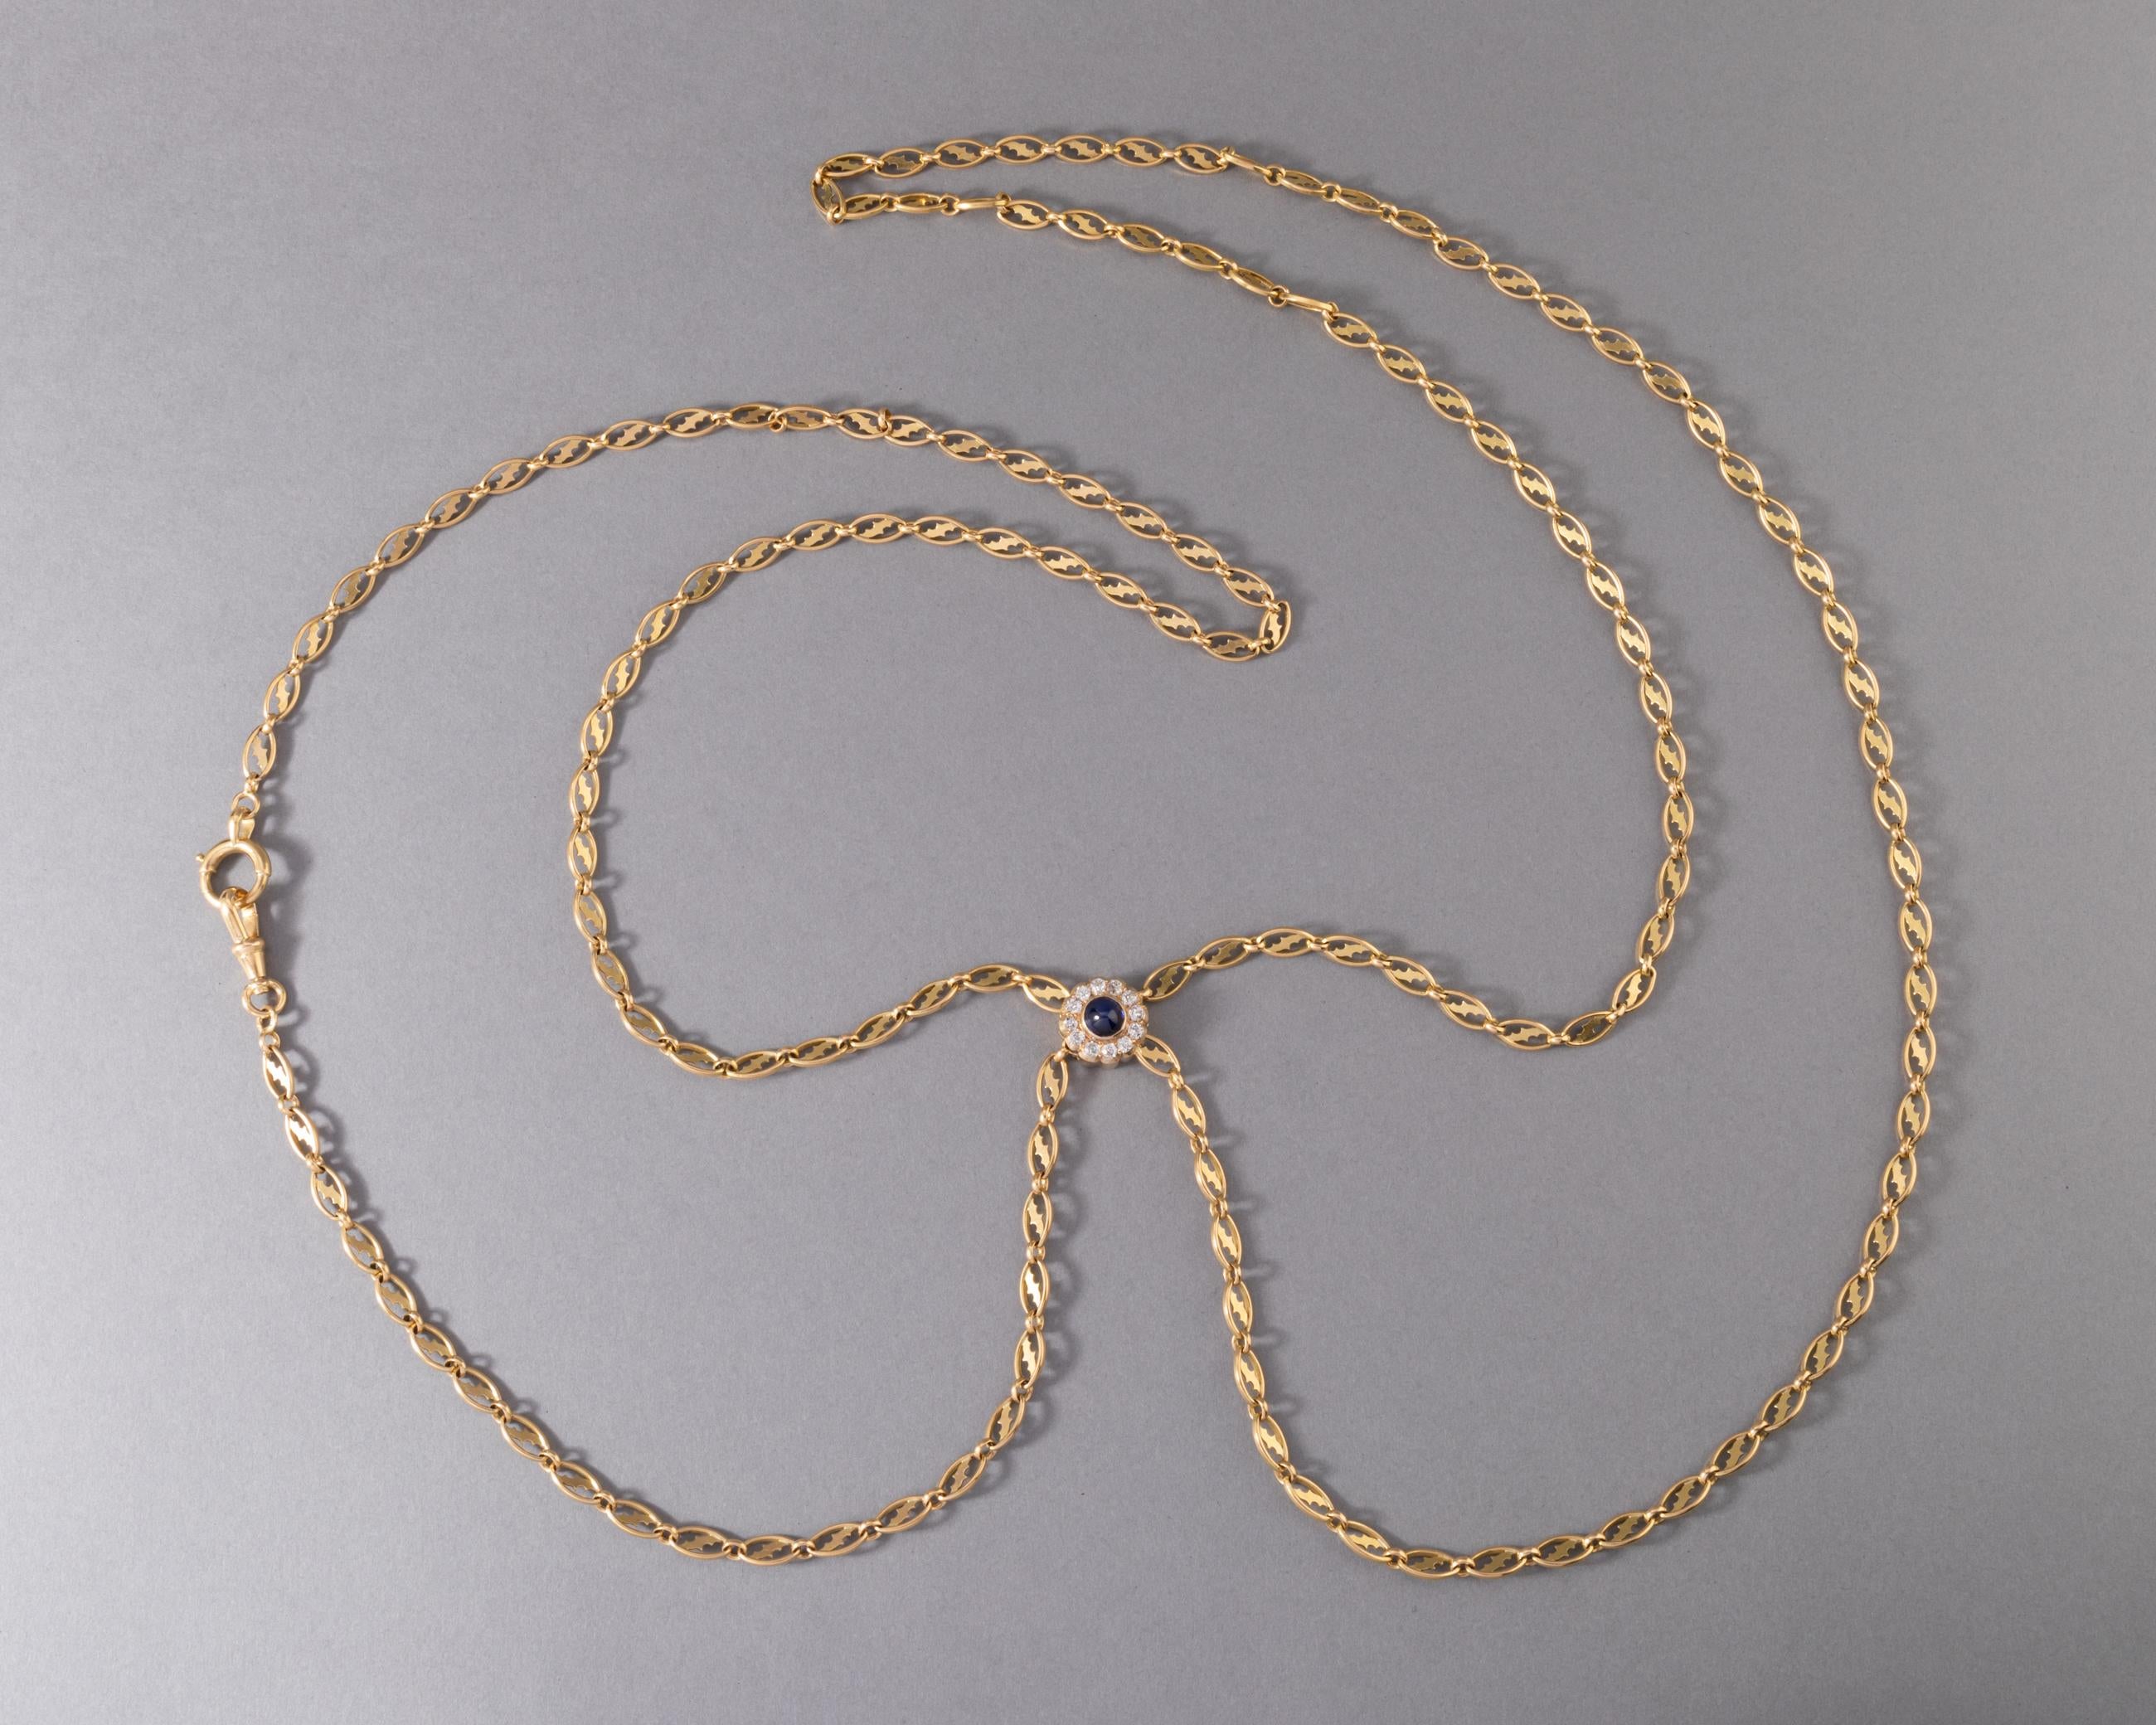 One lovely vintage long gold chain (160 cm).
The chain is made in yellow gold 18, multiple hallmarks (Eagle head, rhino head). 
The coulant is set with a  cabochon sapphire of 1.4 carats approximately. With 0.80 carats arround. The diamonds are old